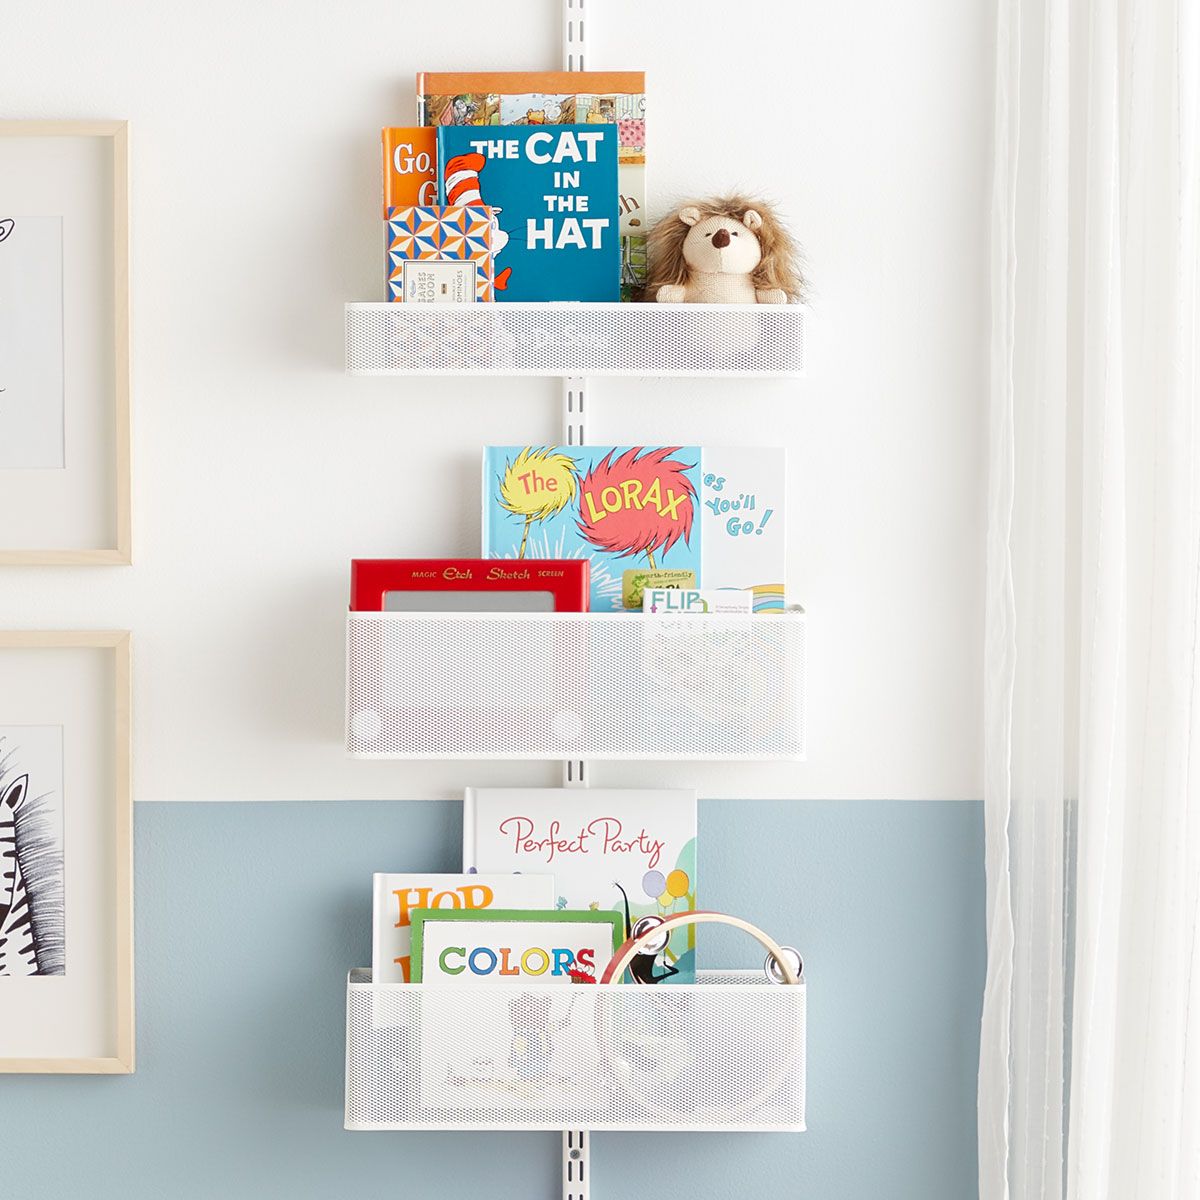 Wall-Mounted Rack | The Container Store